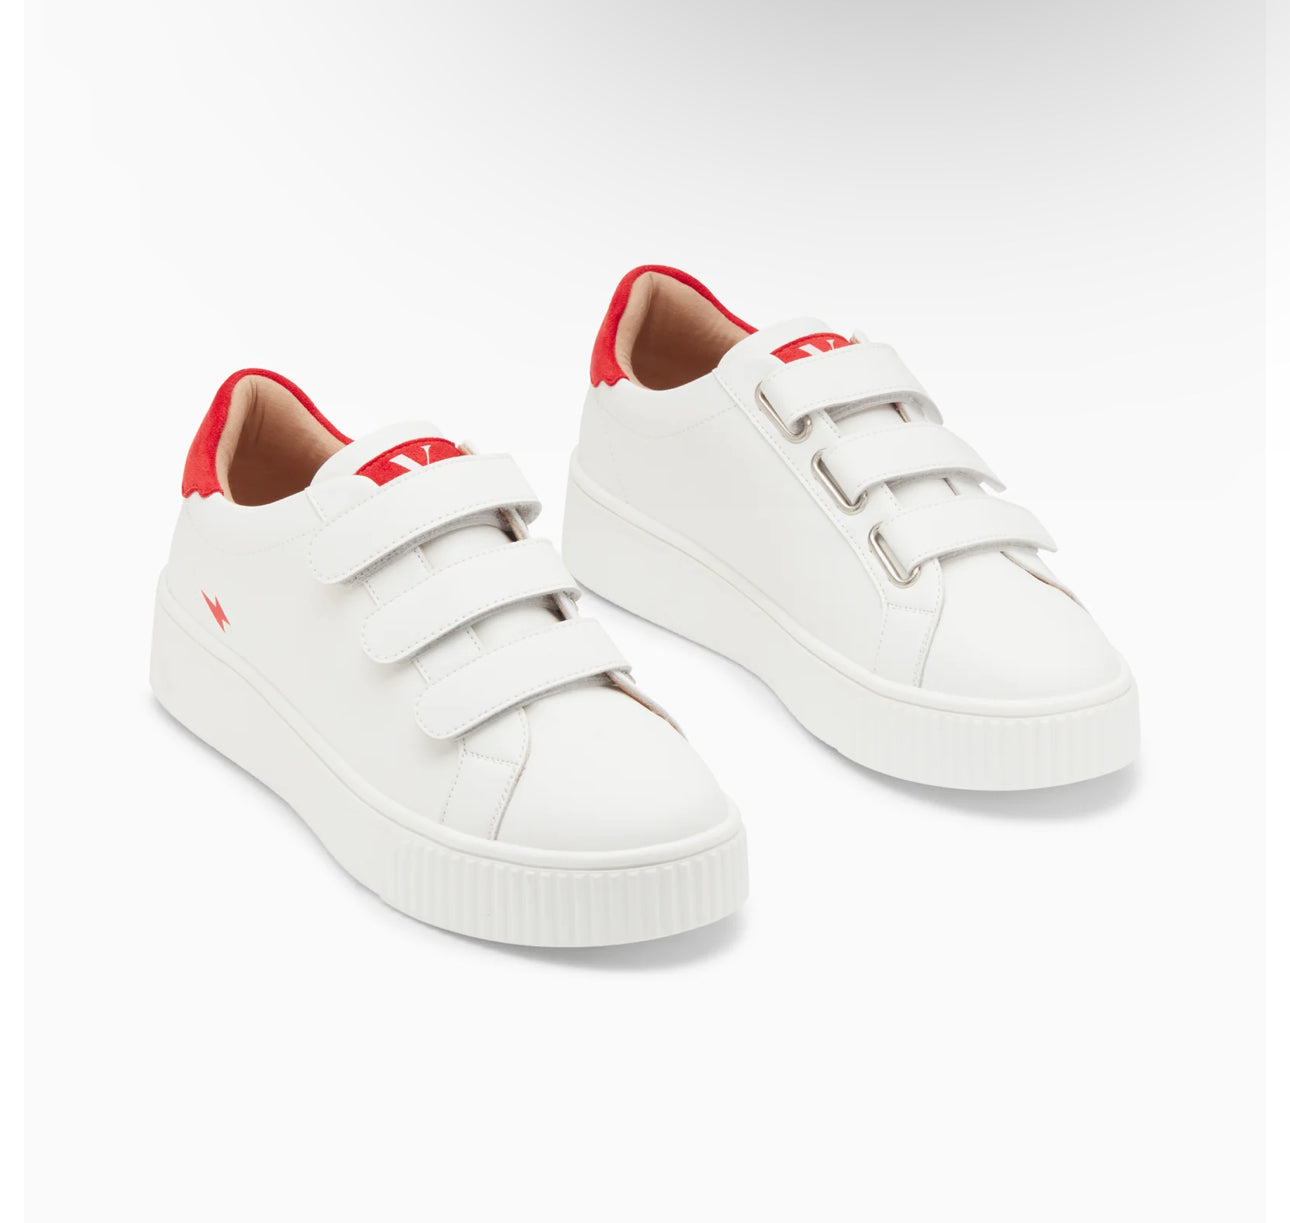 Solange White and Red Storm Trainers with Velcro